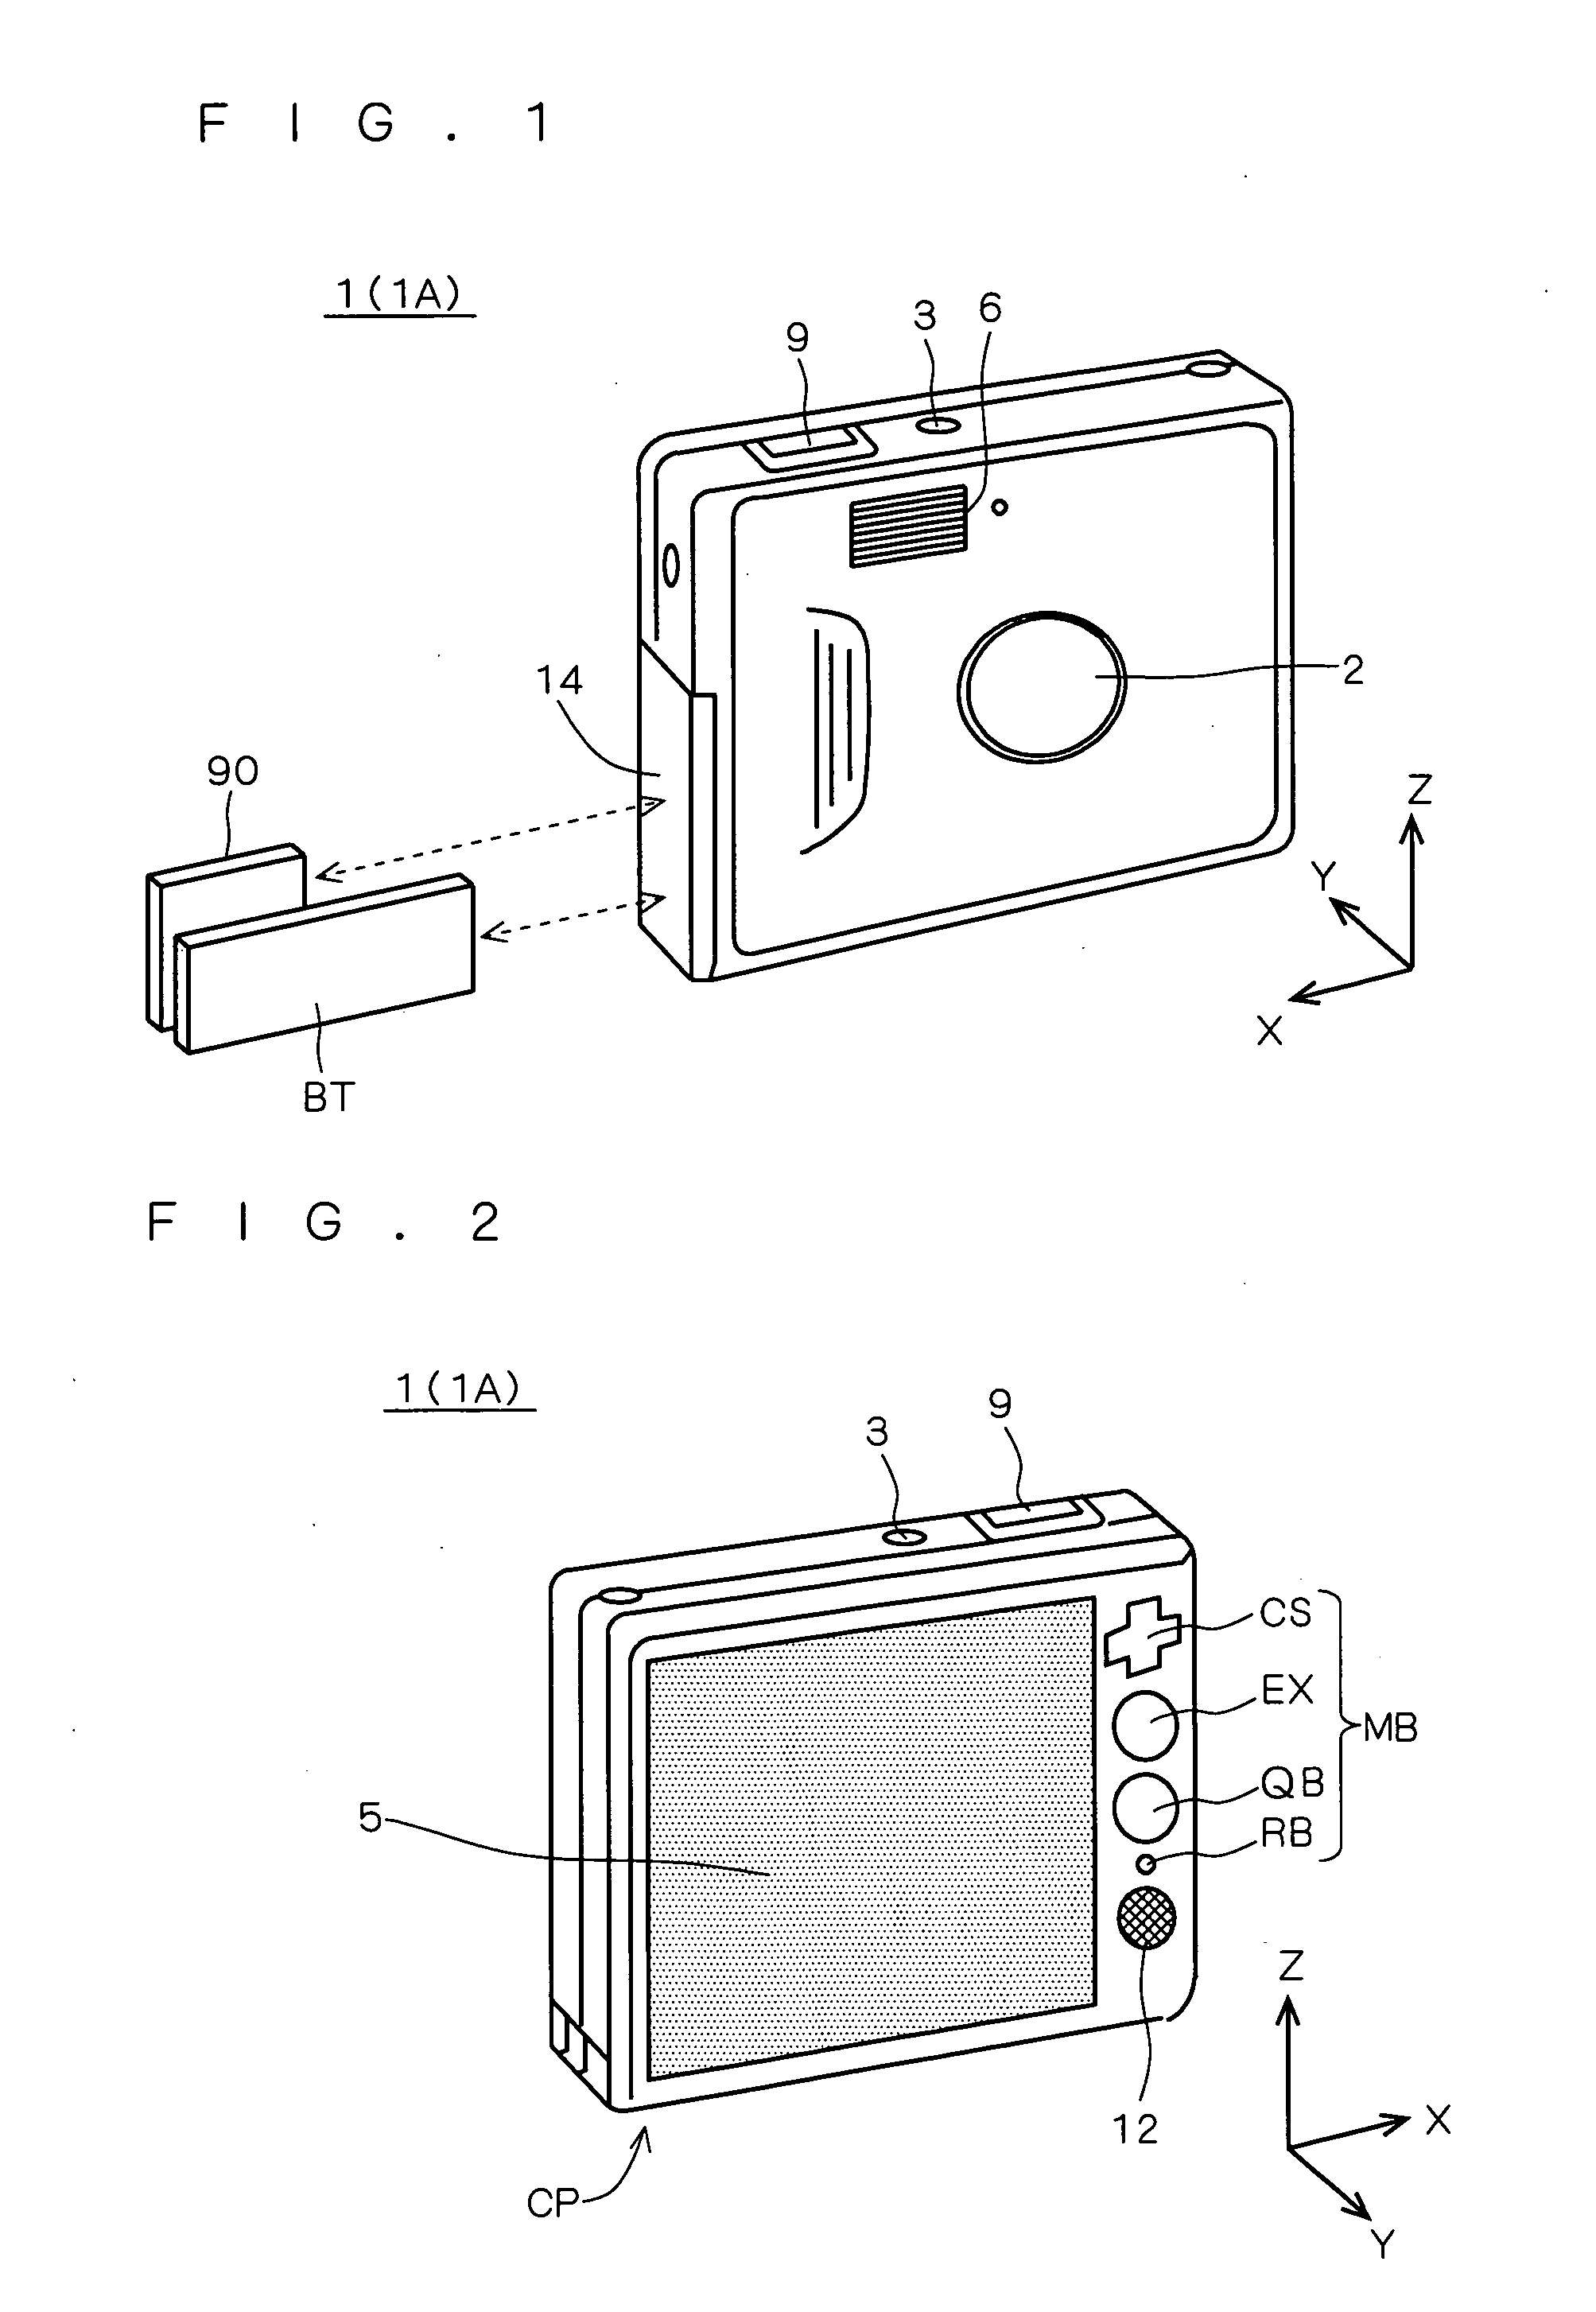 Image capturing apparatus and navigation system